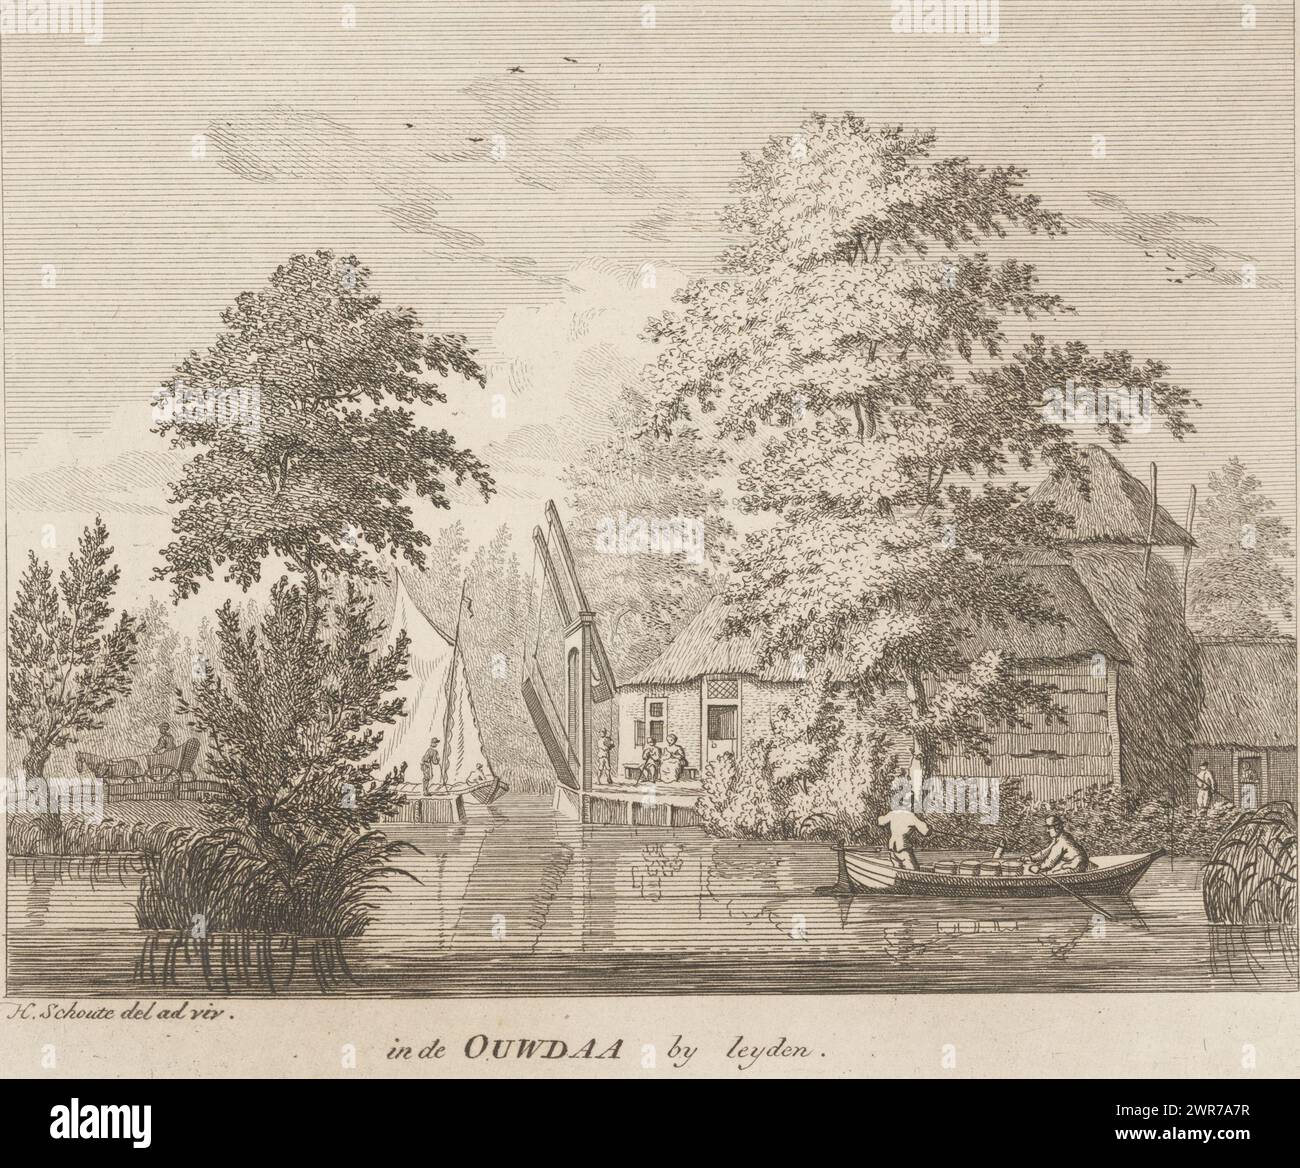 View of the Oude Ade near Leiden, In the Ouwdaa near Leyden (title on object), View of a farm on the Oude Ade near Leiden. A sailboat passes a drawbridge on the left. A rowing boat on the right. Numbered top right: 2., print maker: Hermanus Petrus Schouten, (possibly), after drawing by: Hermanus Petrus Schouten, Netherlands, c. 1762 - c. 1800, paper, etching, height 164 mm × width 202 mm, print Stock Photo